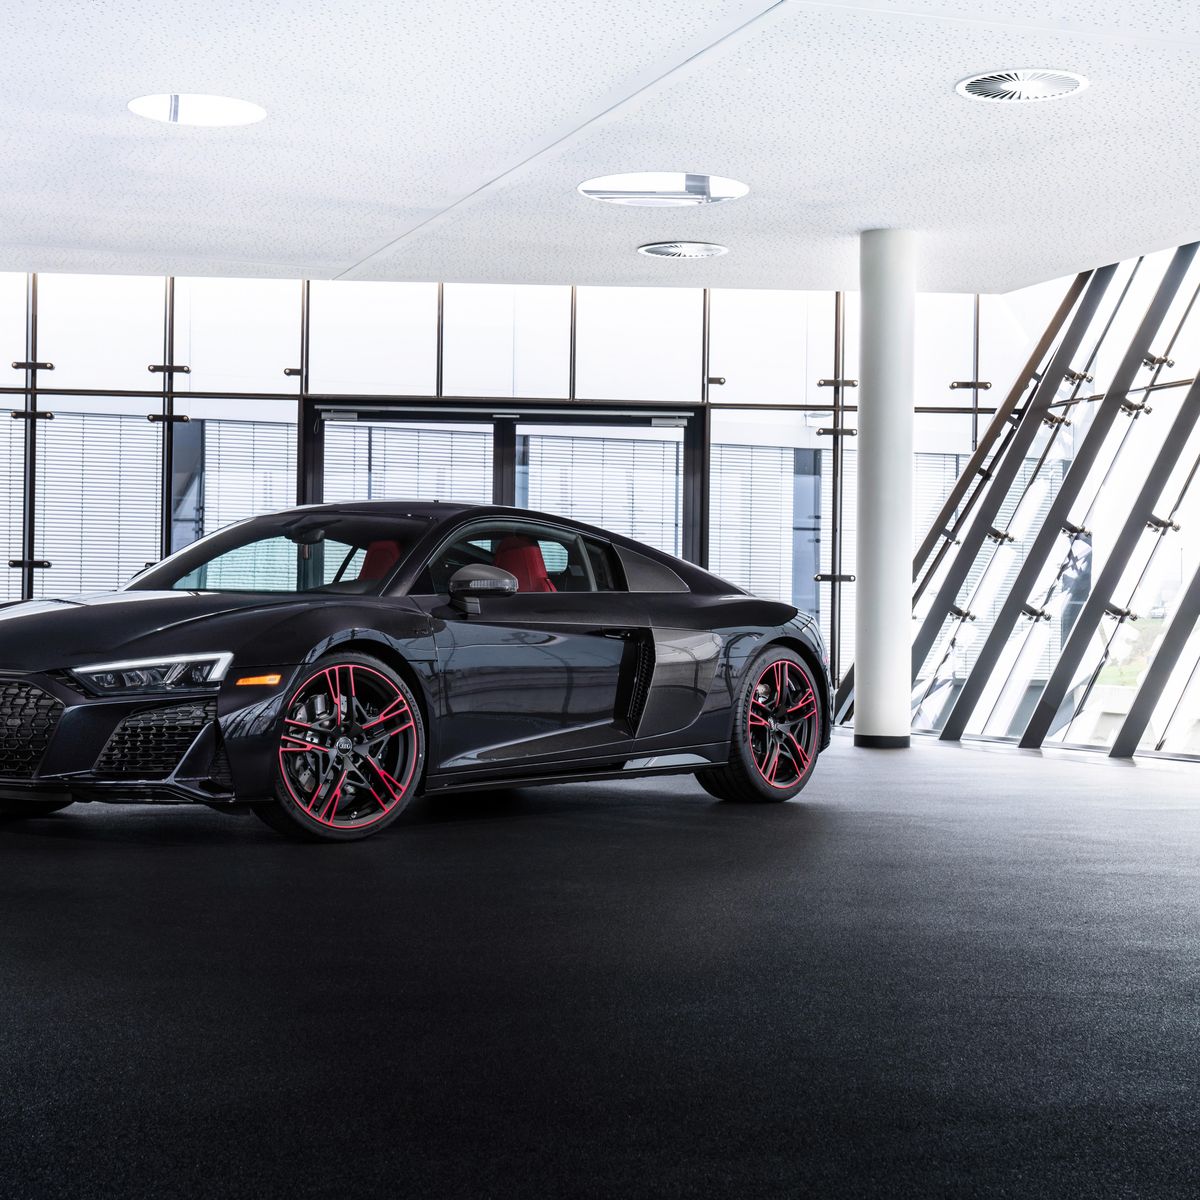 2021 Audi R8 Panther Edition Has Red Limited 30 Cars